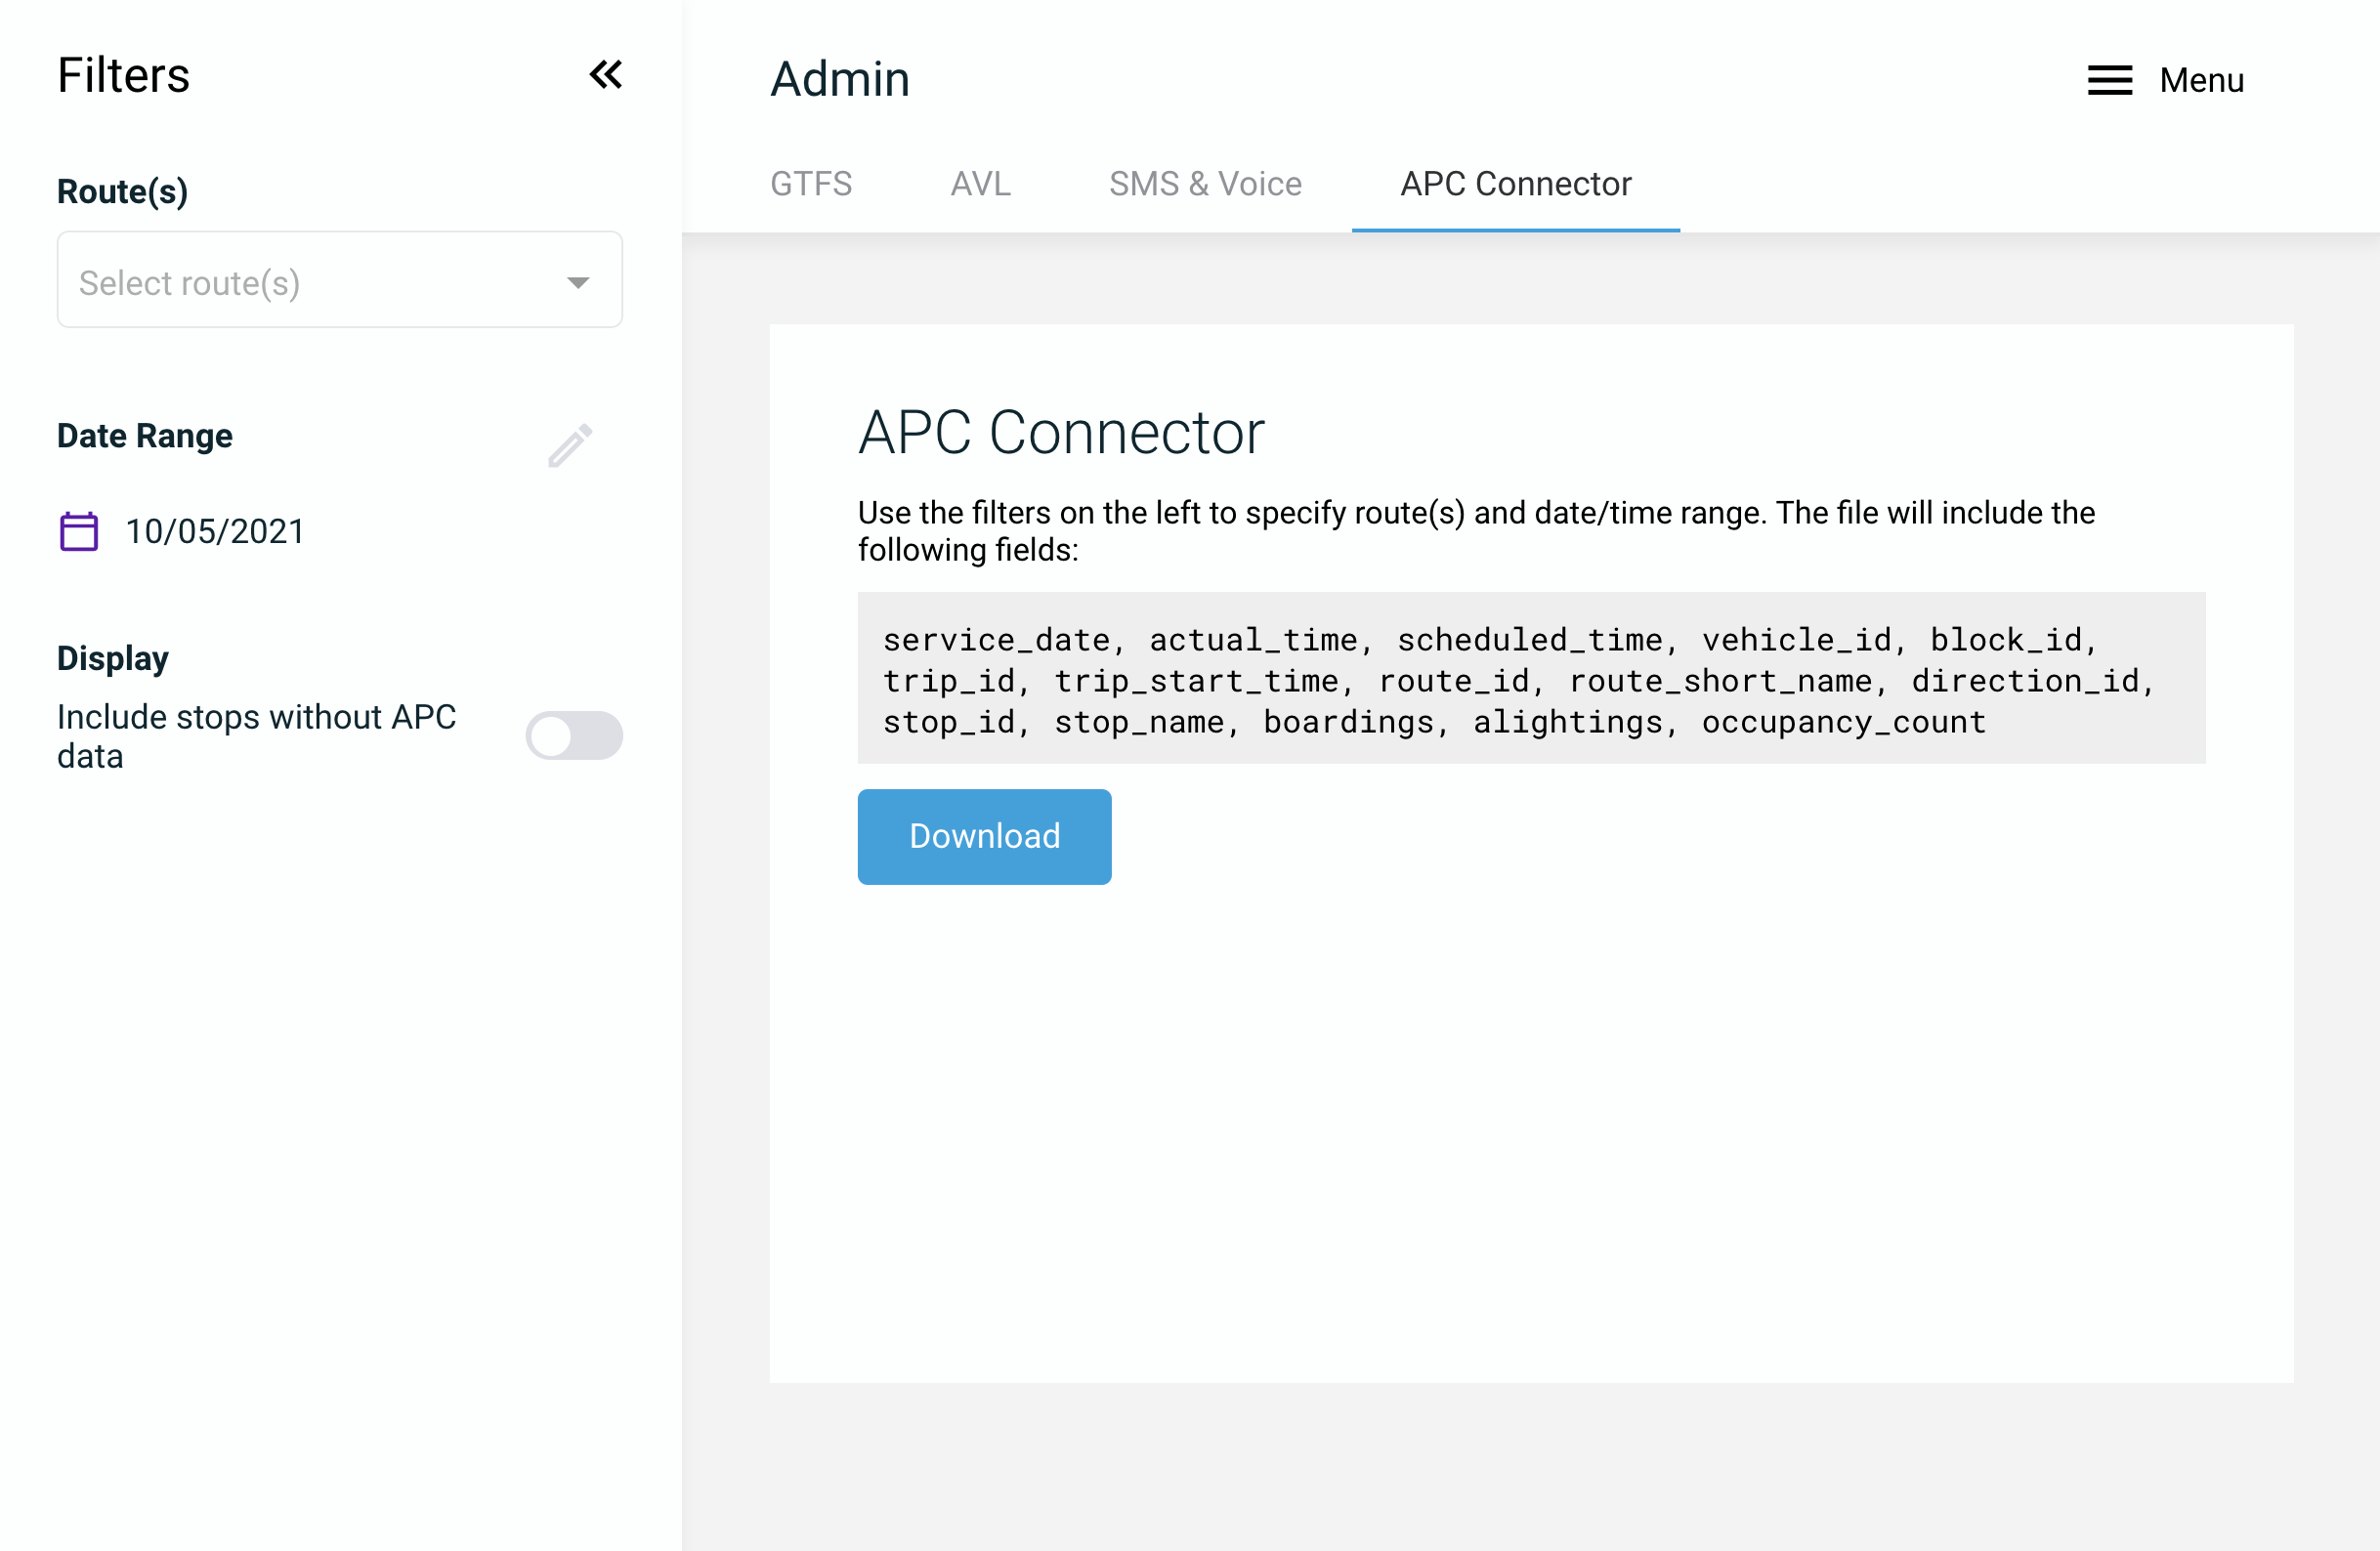 APC Connector: Connect your APC units directly to the internet for real-time crowding and easy-to-access historical data. Inform planning and scheduling decisions using accessible, accurate, and up-to-date ridership data.